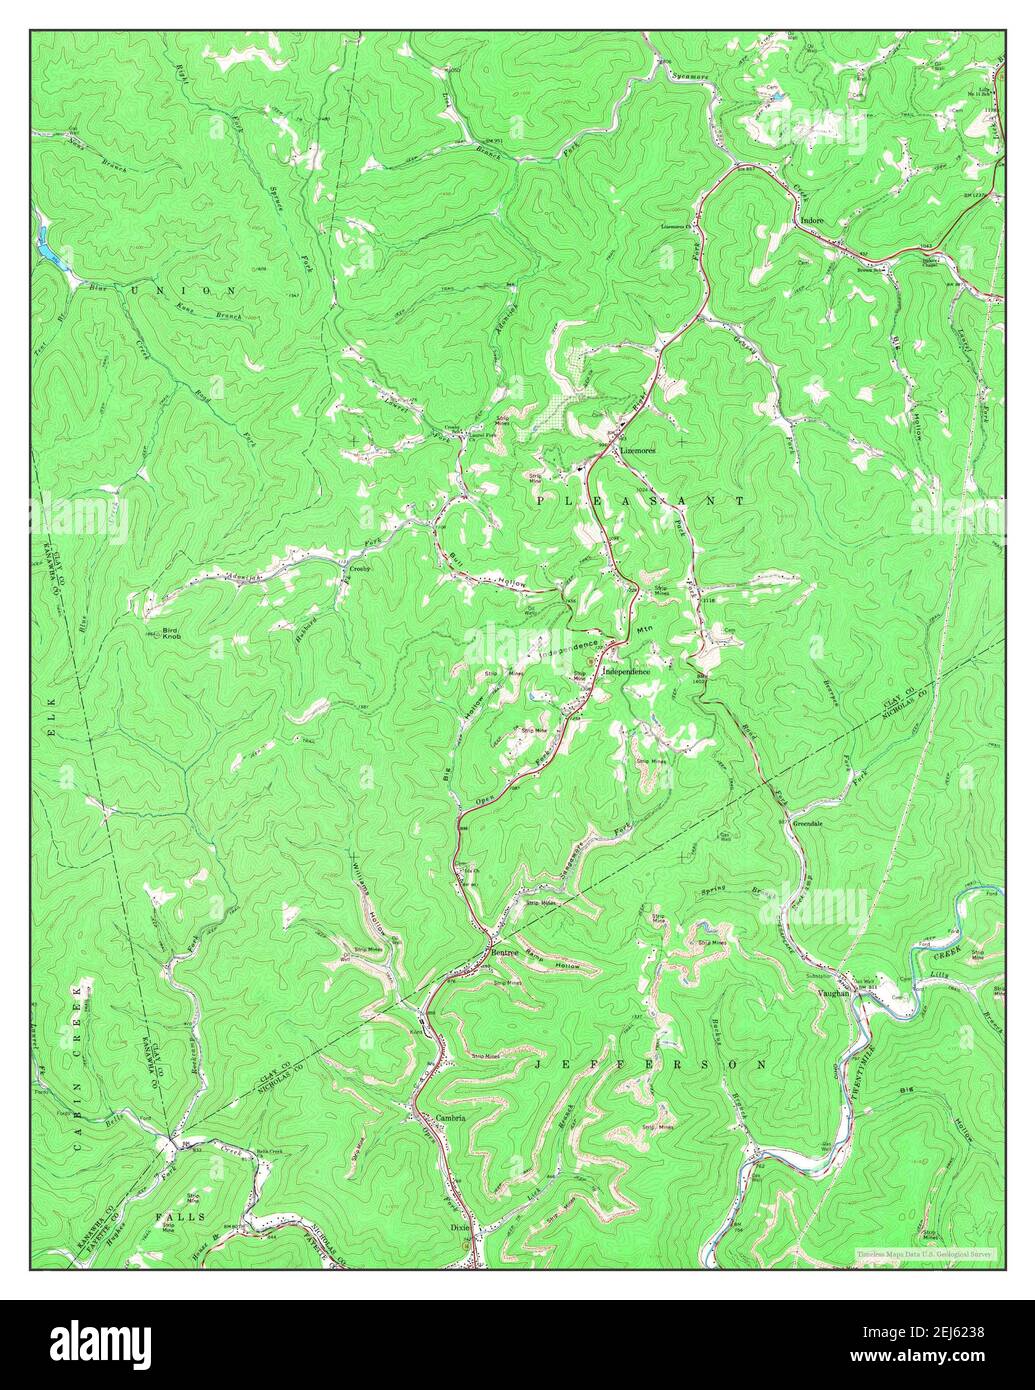 Bentree, West Virginia, map 1967, 1:24000, United States of America by Timeless Maps, data U.S. Geological Survey Stock Photo